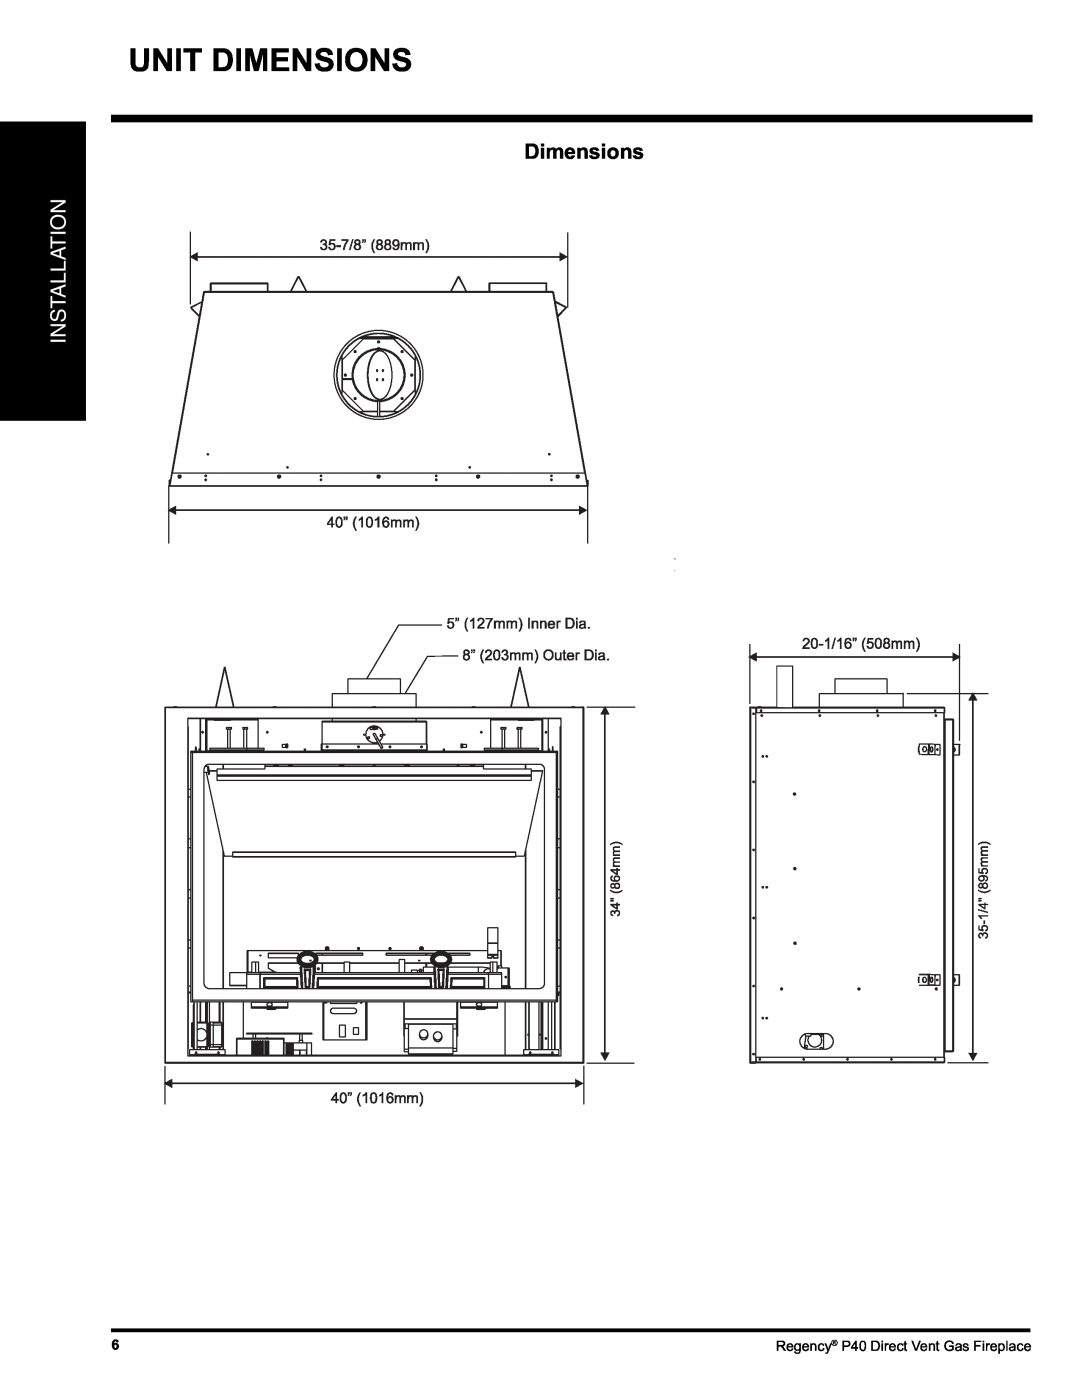 Regency P40-NG, P40-LP installation manual Unit Dimensions, Installation, Regency P40 Direct Vent Gas Fireplace 